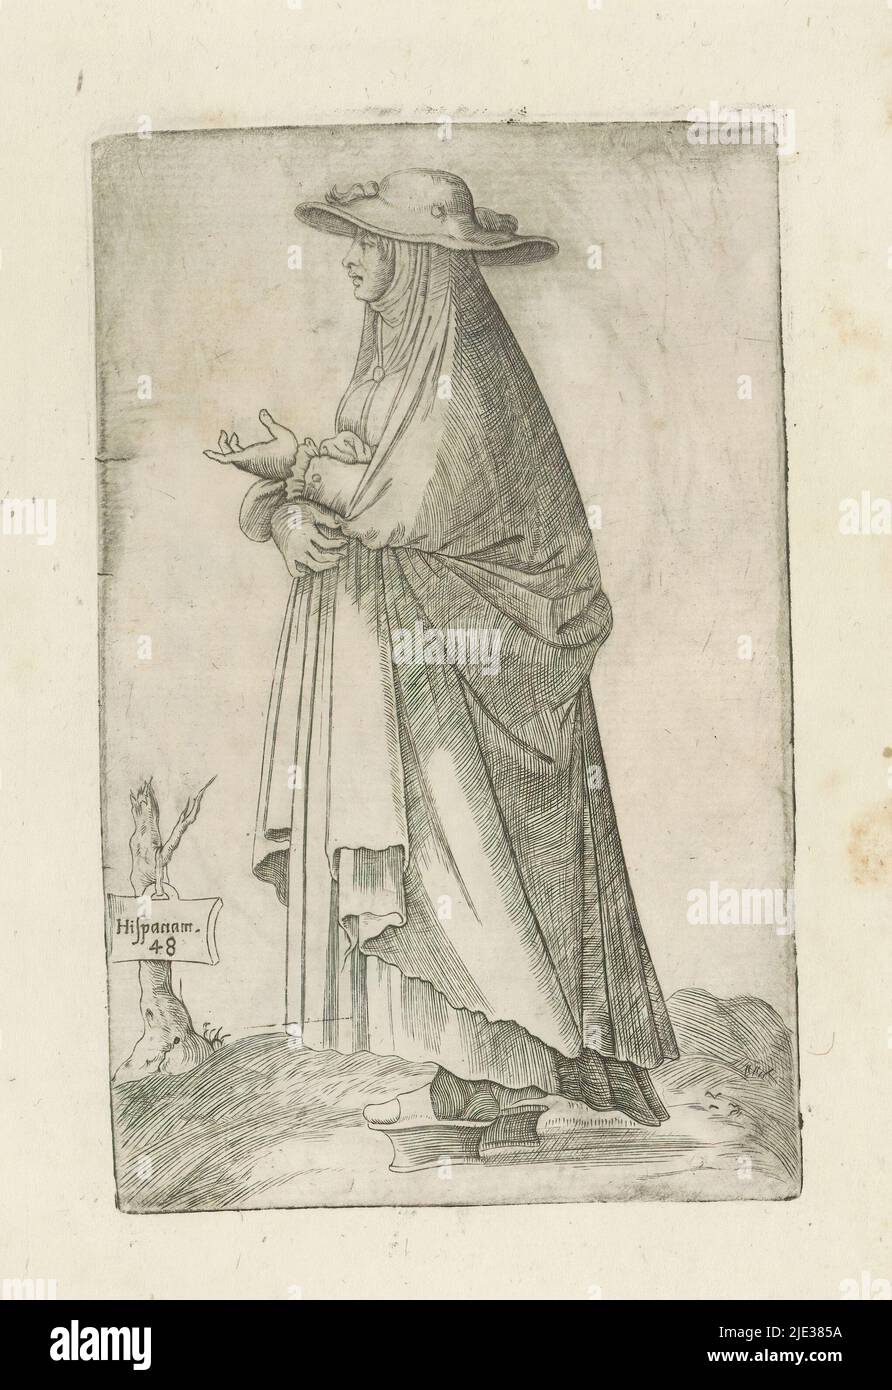 Spanish woman, walking on triplets, Hispana m(ulier) (title on object), Omnium fere gentium nostrae aetatis habitus, nunquam ante hac aediti (series title), A married Spanish woman, to the left, walking on triplets (wooden under shoes) . Hat with wide brim on head, wide cloak. Part of the costume book entitled 'Omnium fere gentium nostrae aetatis habitus, nunquam ante hac aediti', Venice 1569. Reissue from 1569 of the first edition from 1563., print maker: Ferando Bertelli, after print by: Enea Vico, publisher: Ferando Bertelli, Venice, 1569, paper, engraving, height 265 mm × width 195 mm, hei Stock Photo